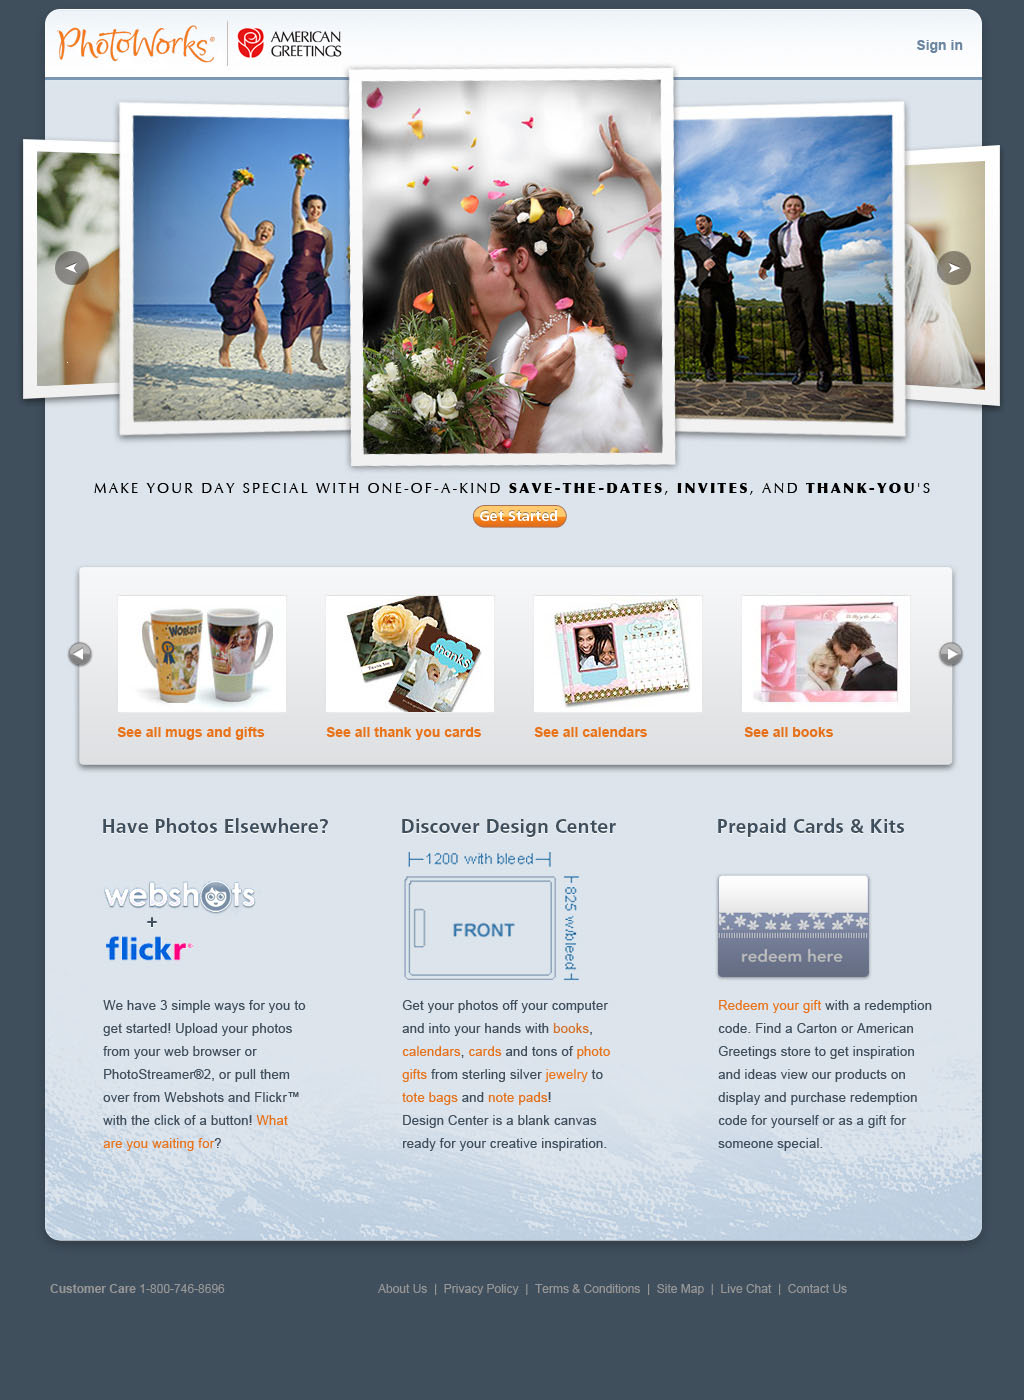 Landing page showing a wedding promotion